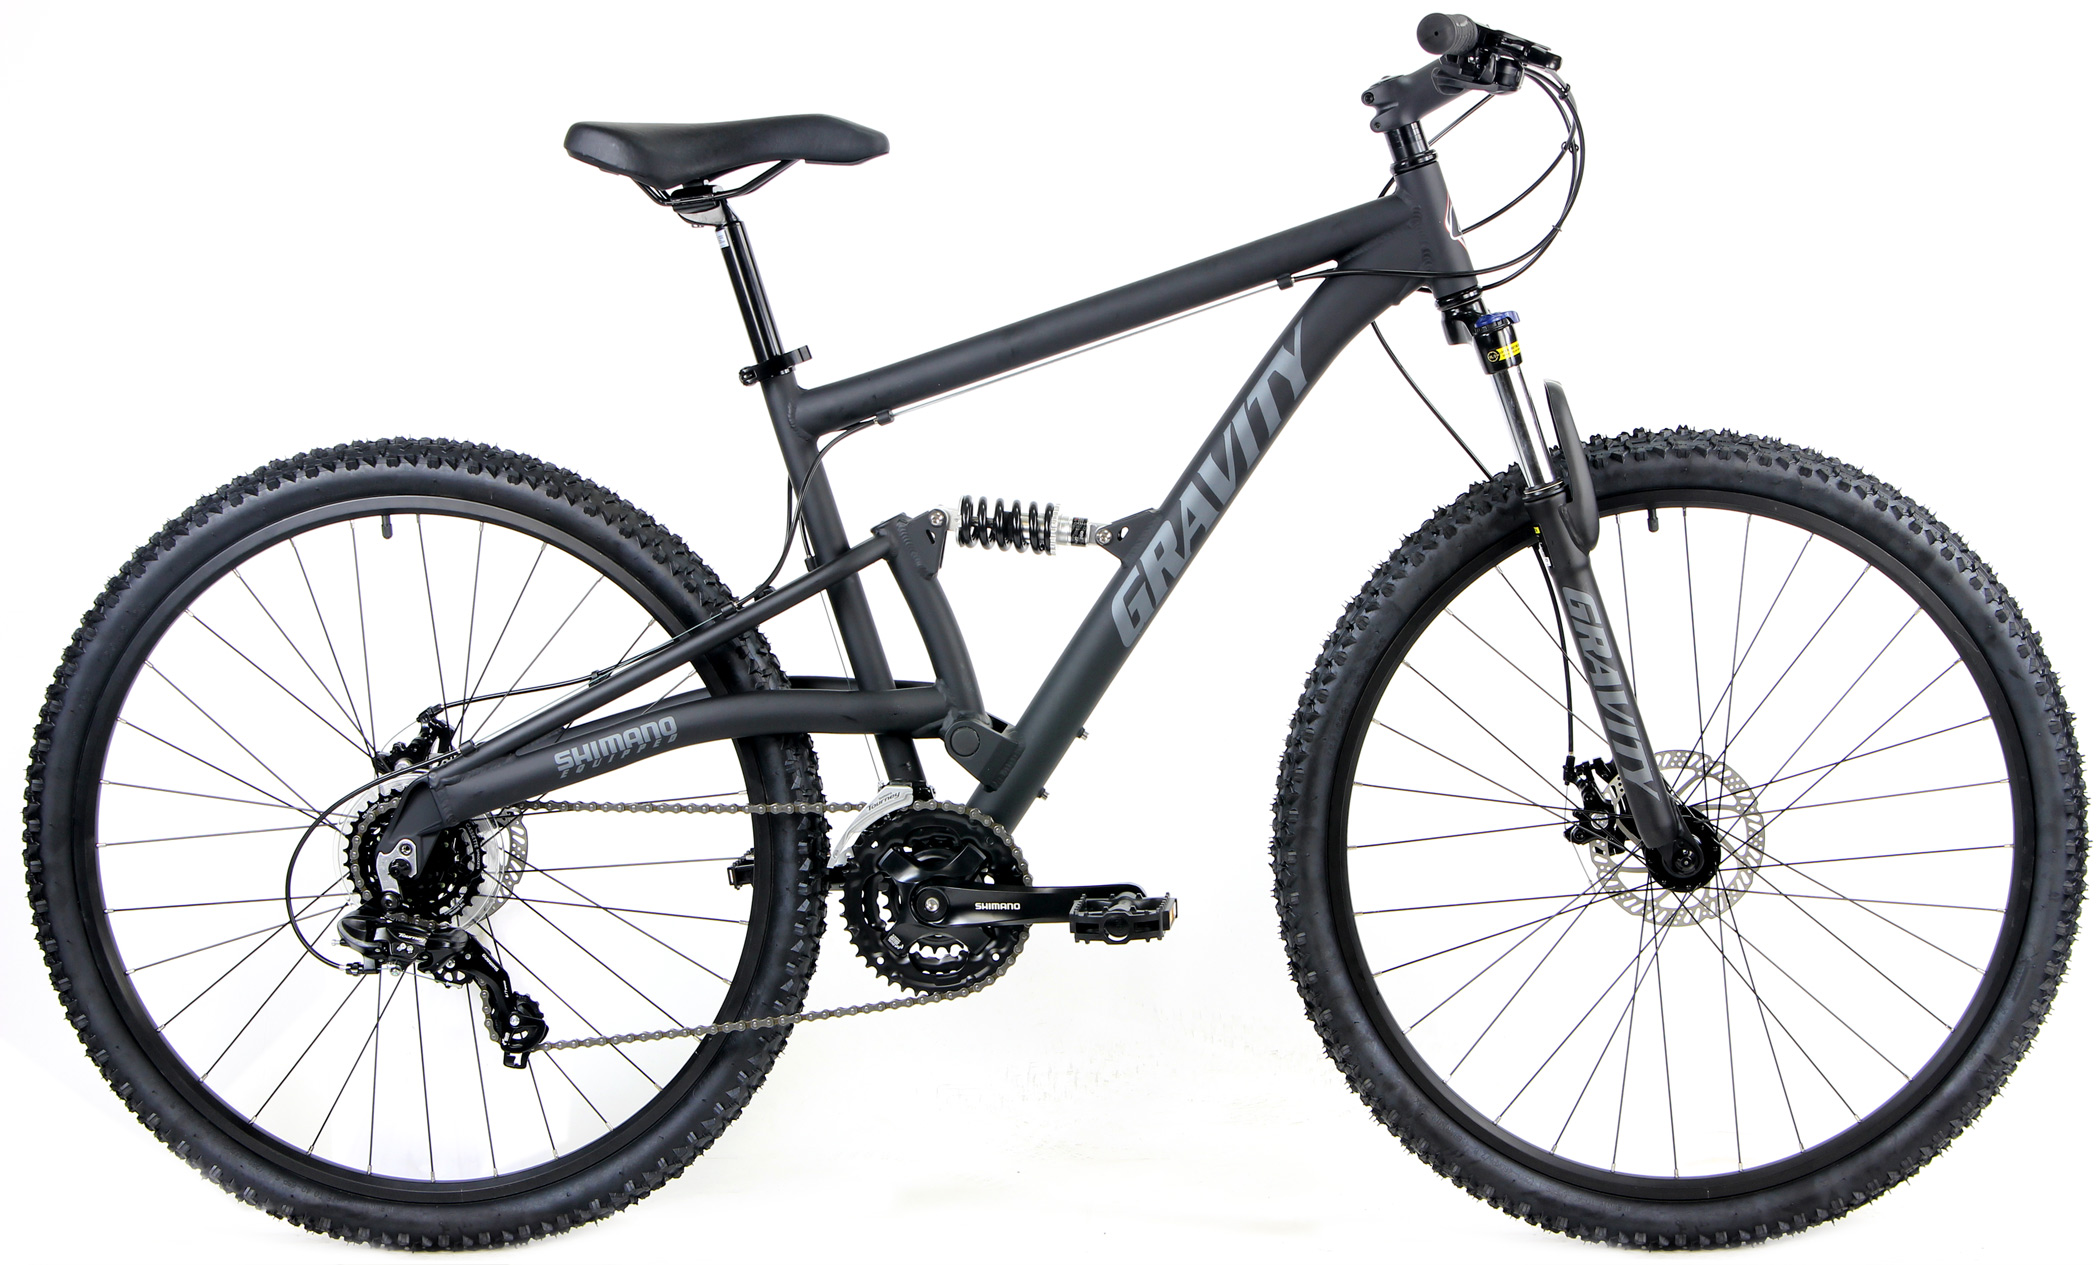 Save up to 60% off new 29er Mountain Bikes - MTB